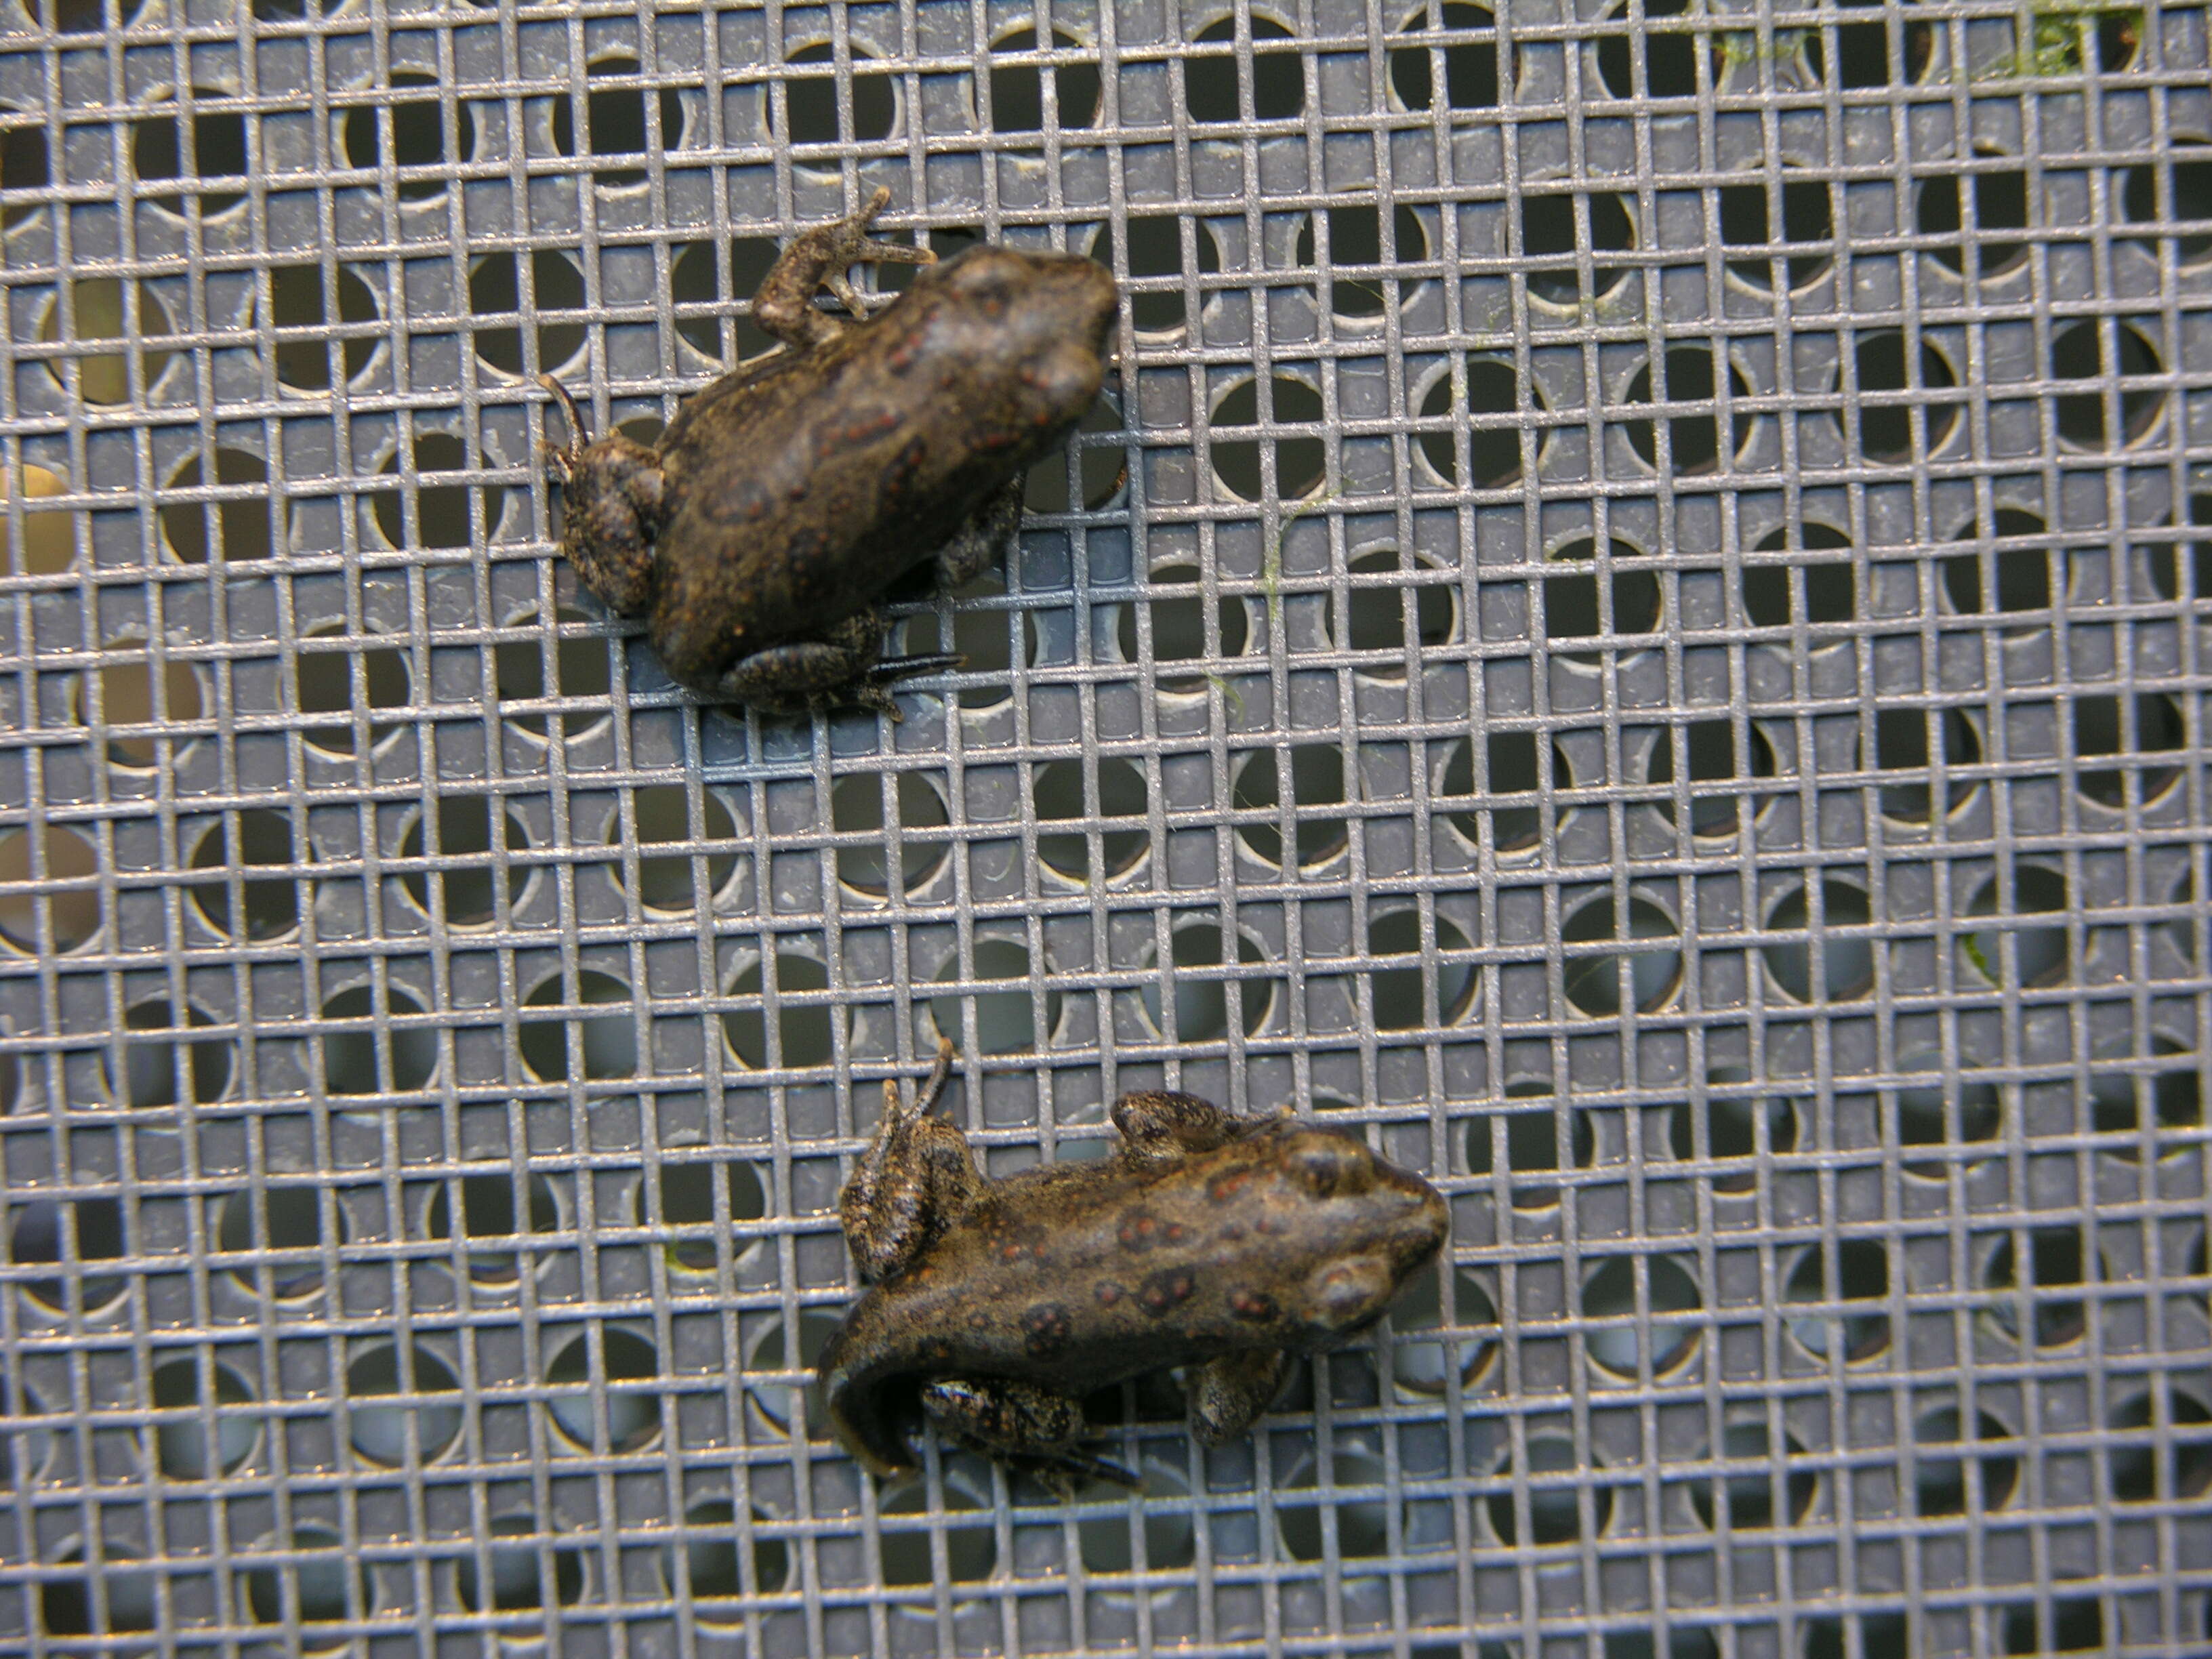 Image of Baxter's Toad